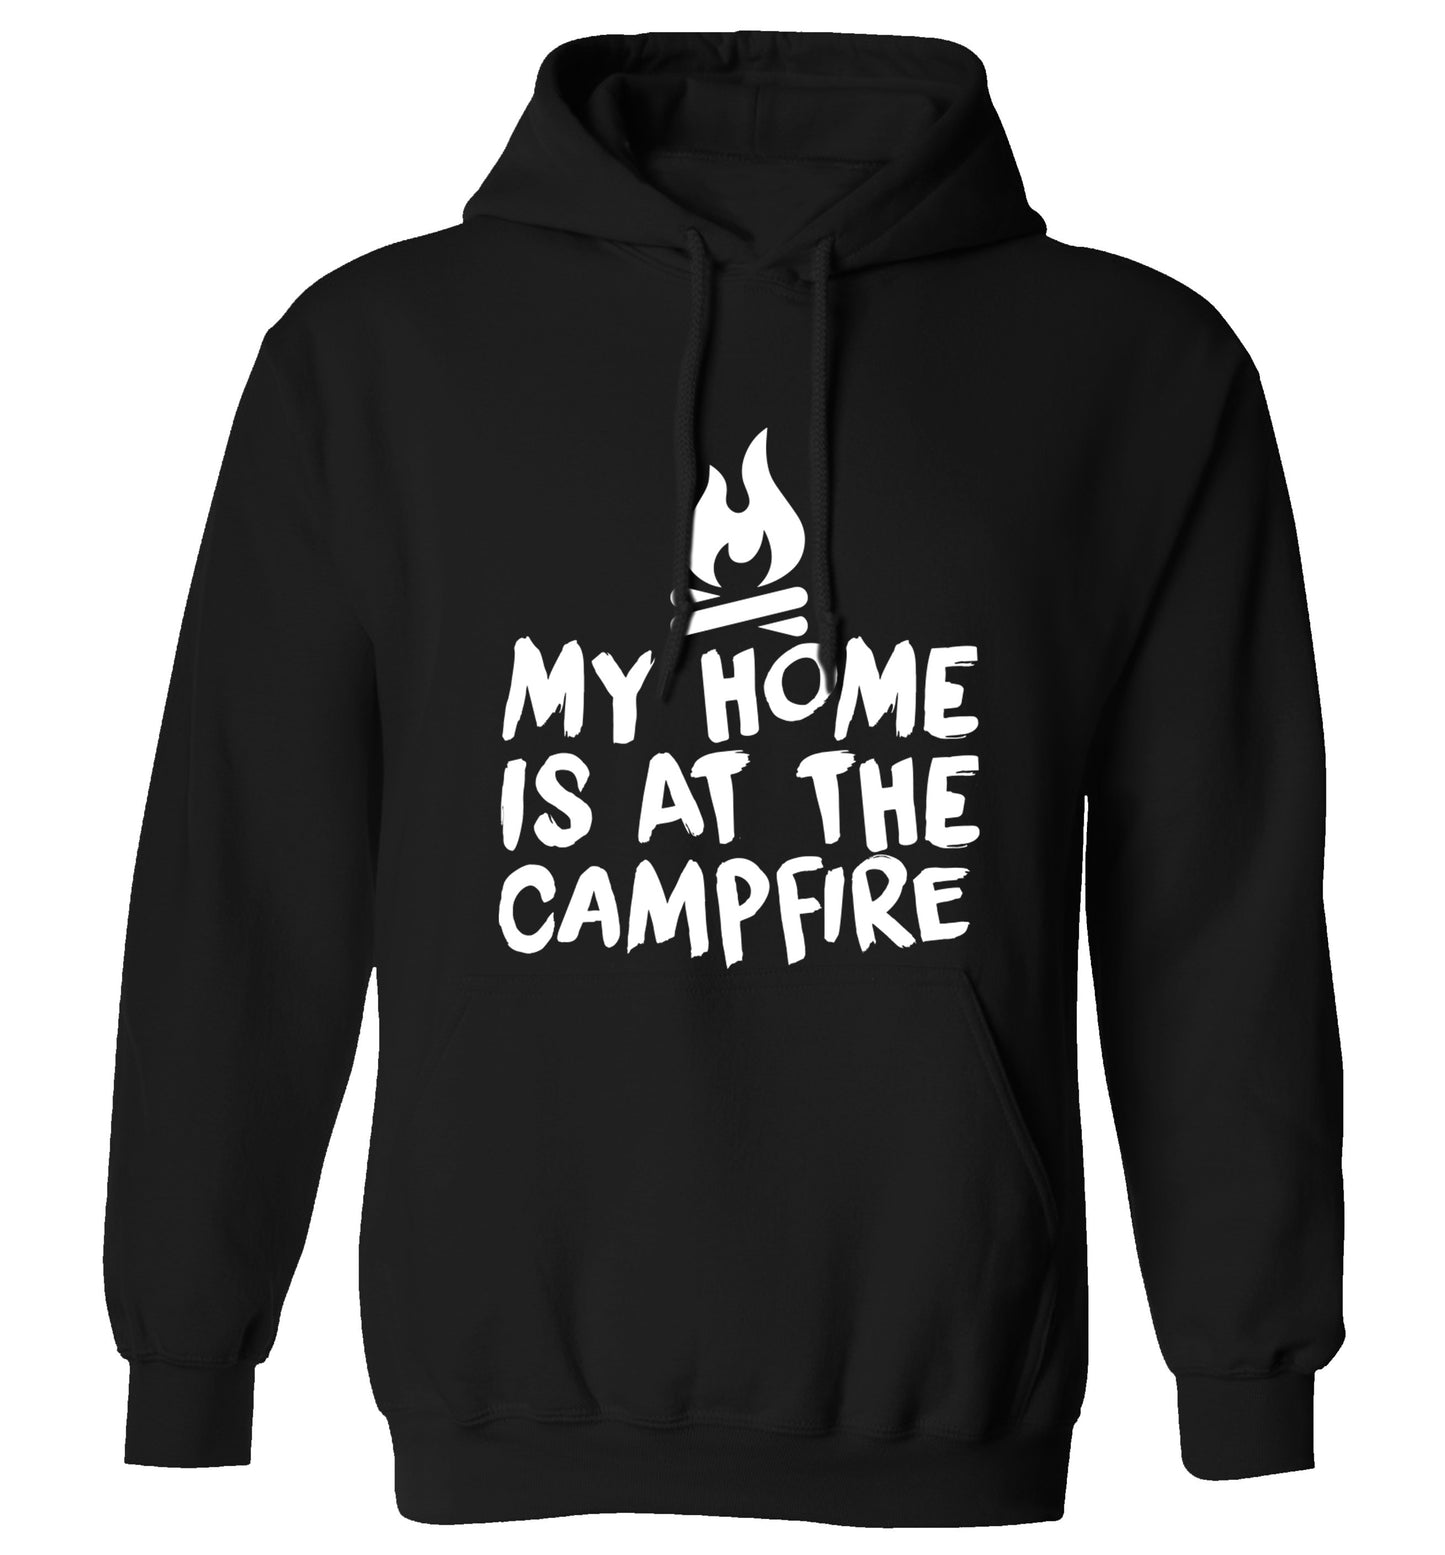 My home is at the campfire adults unisex black hoodie 2XL